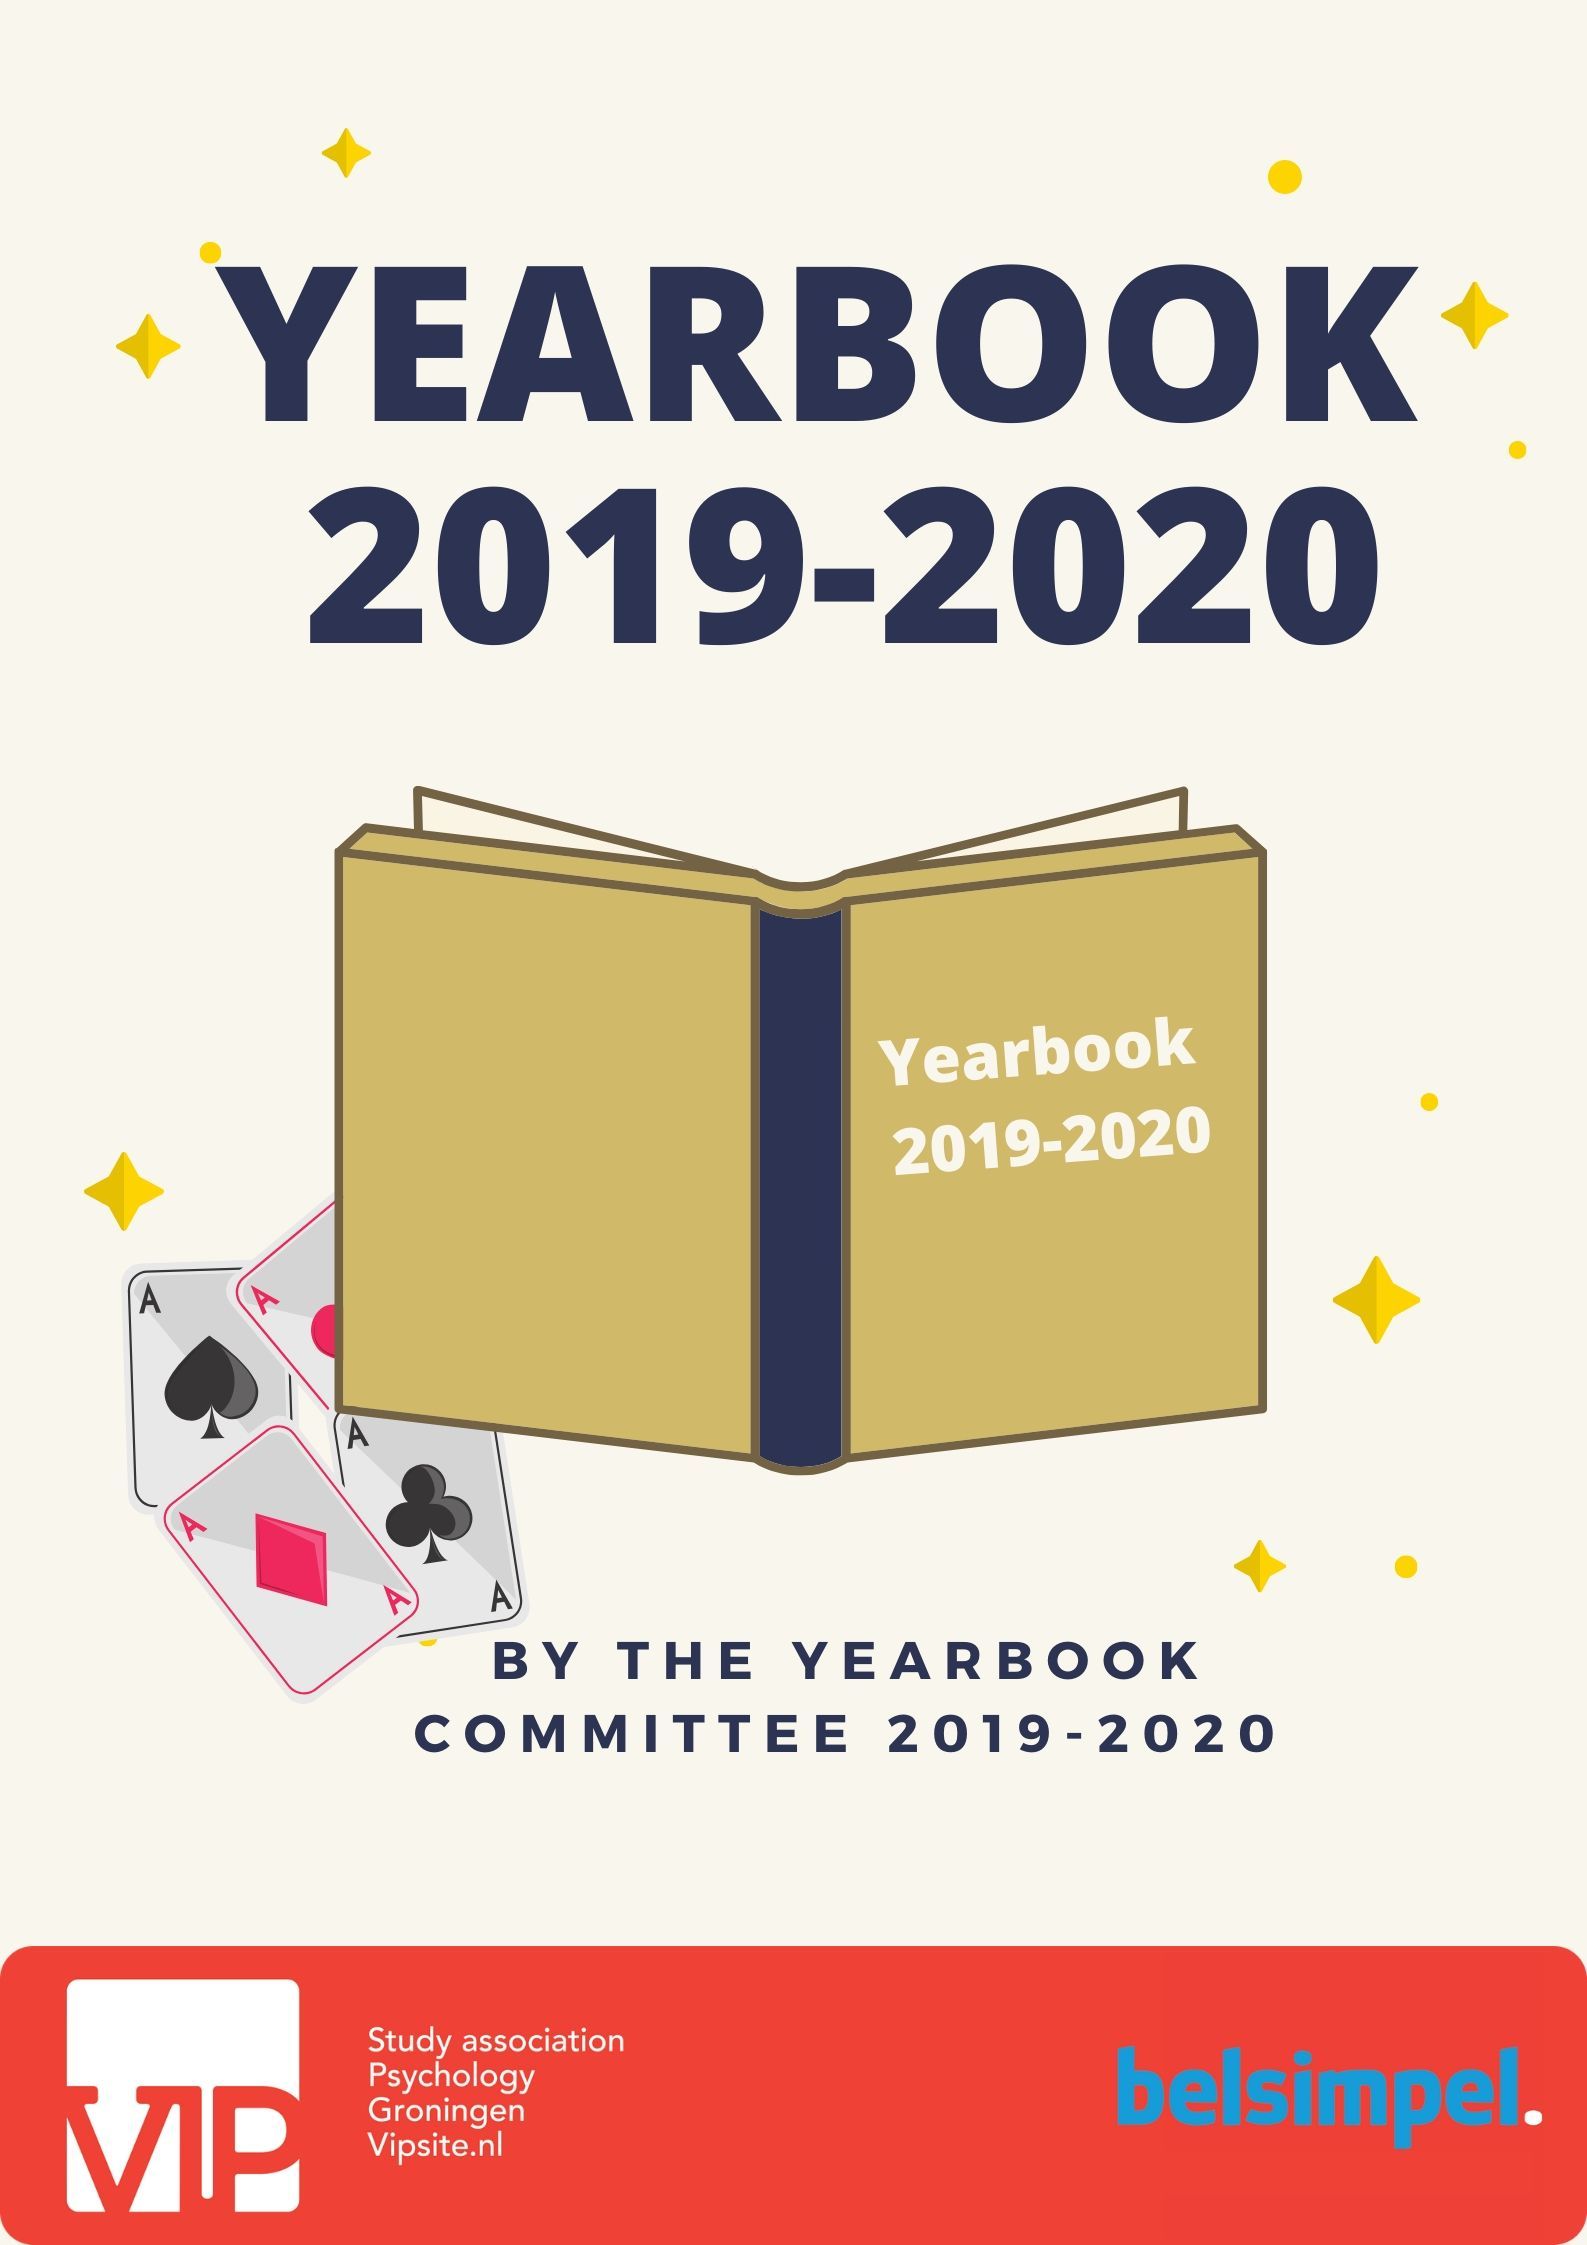 Reserve a Yearbook!